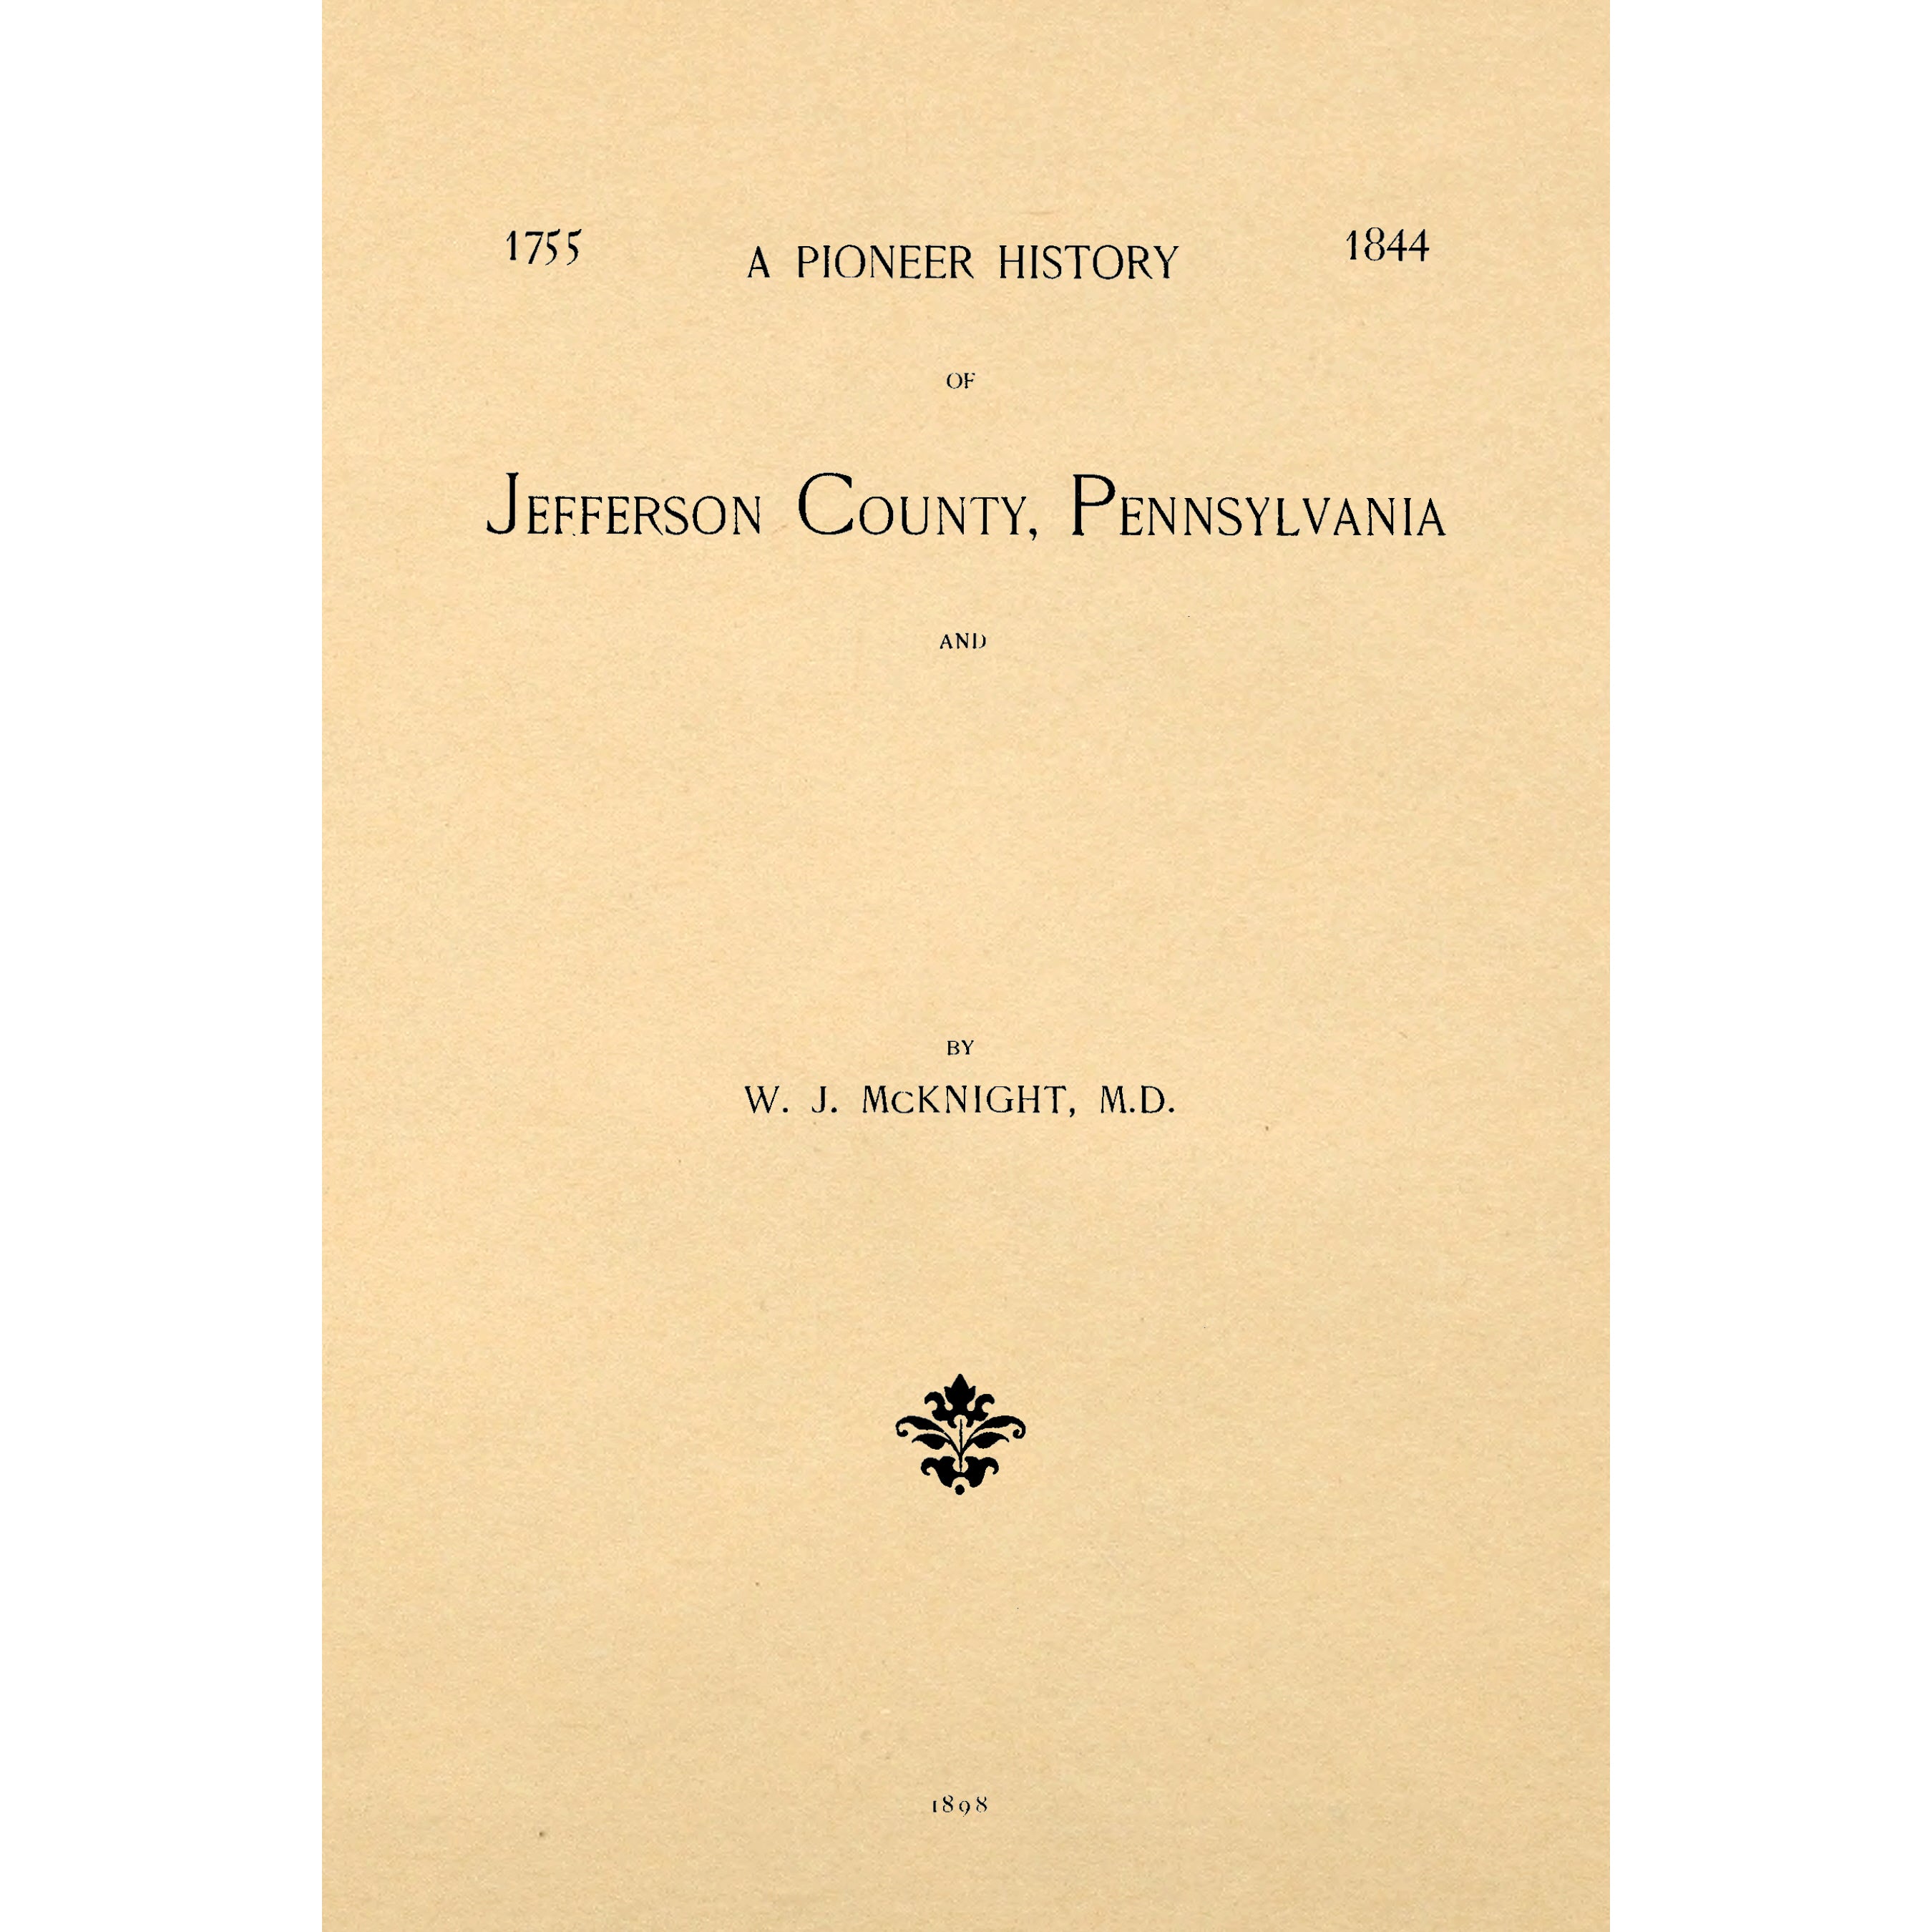 A Pioneer history of Jefferson County, Pennsylvania 1755-1844